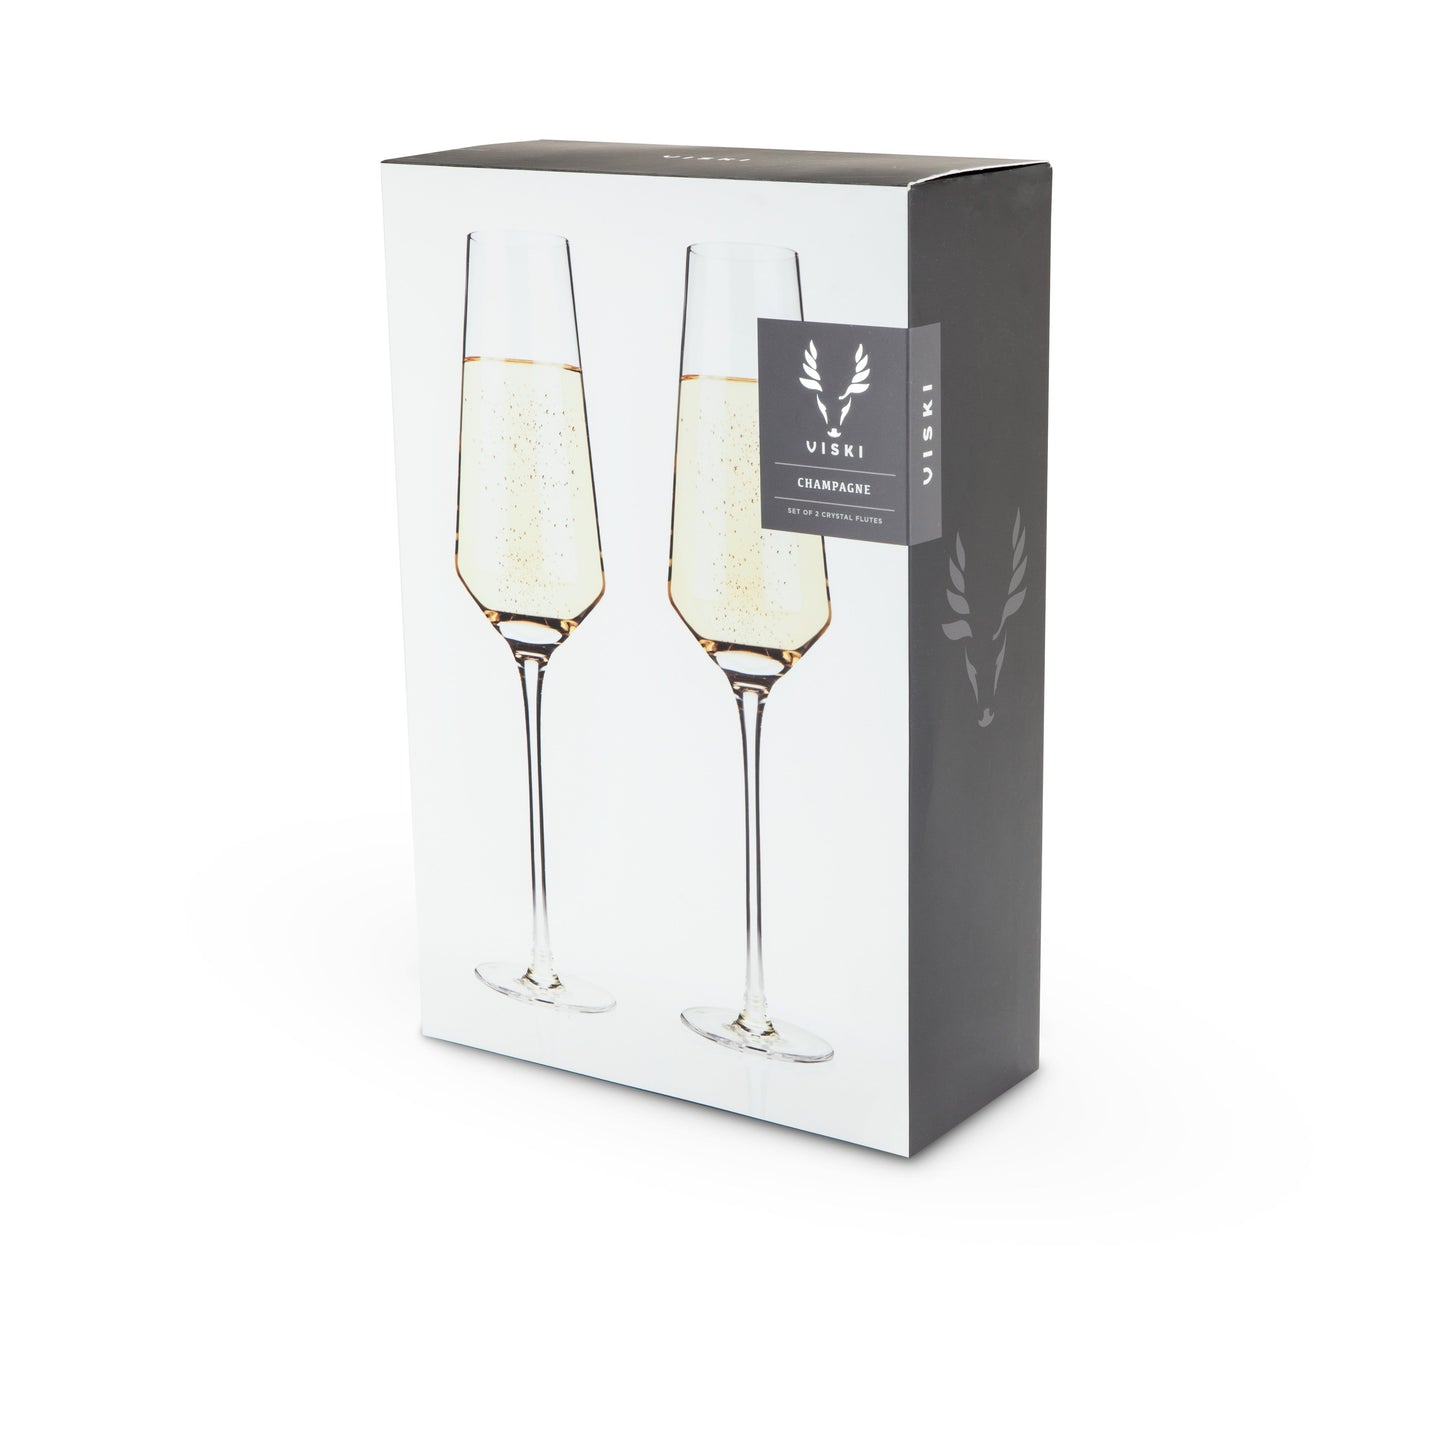 Ideal for effervescent sparkling wine, these stemmed champagne flutes are crafted from a lead-free crystal glass. This glass offers the most-elegant drinkware experience available.  Modern and classy, these glasses are sleek with precise angles. They are perfect for any occasion or the finest of dinner parties. The well-crafted construction results in a pair of wine glasses that will stand the test of time.